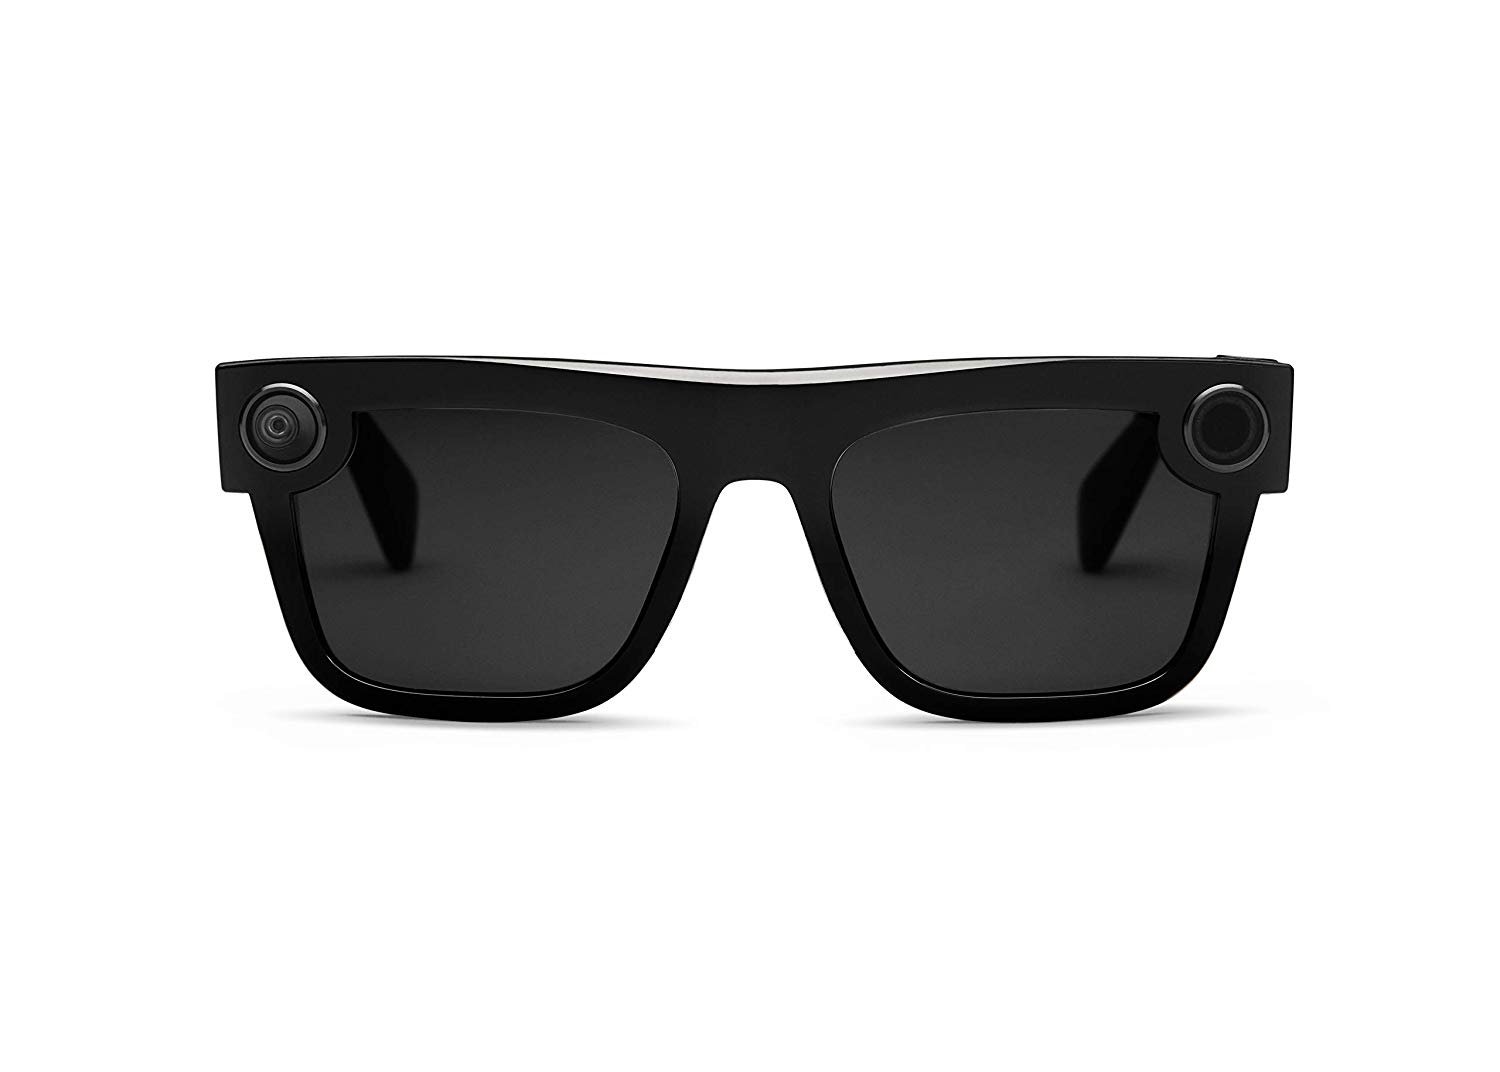 Spectacles - Water Resistant Camera Sunglasses - Made for Snapchat 2